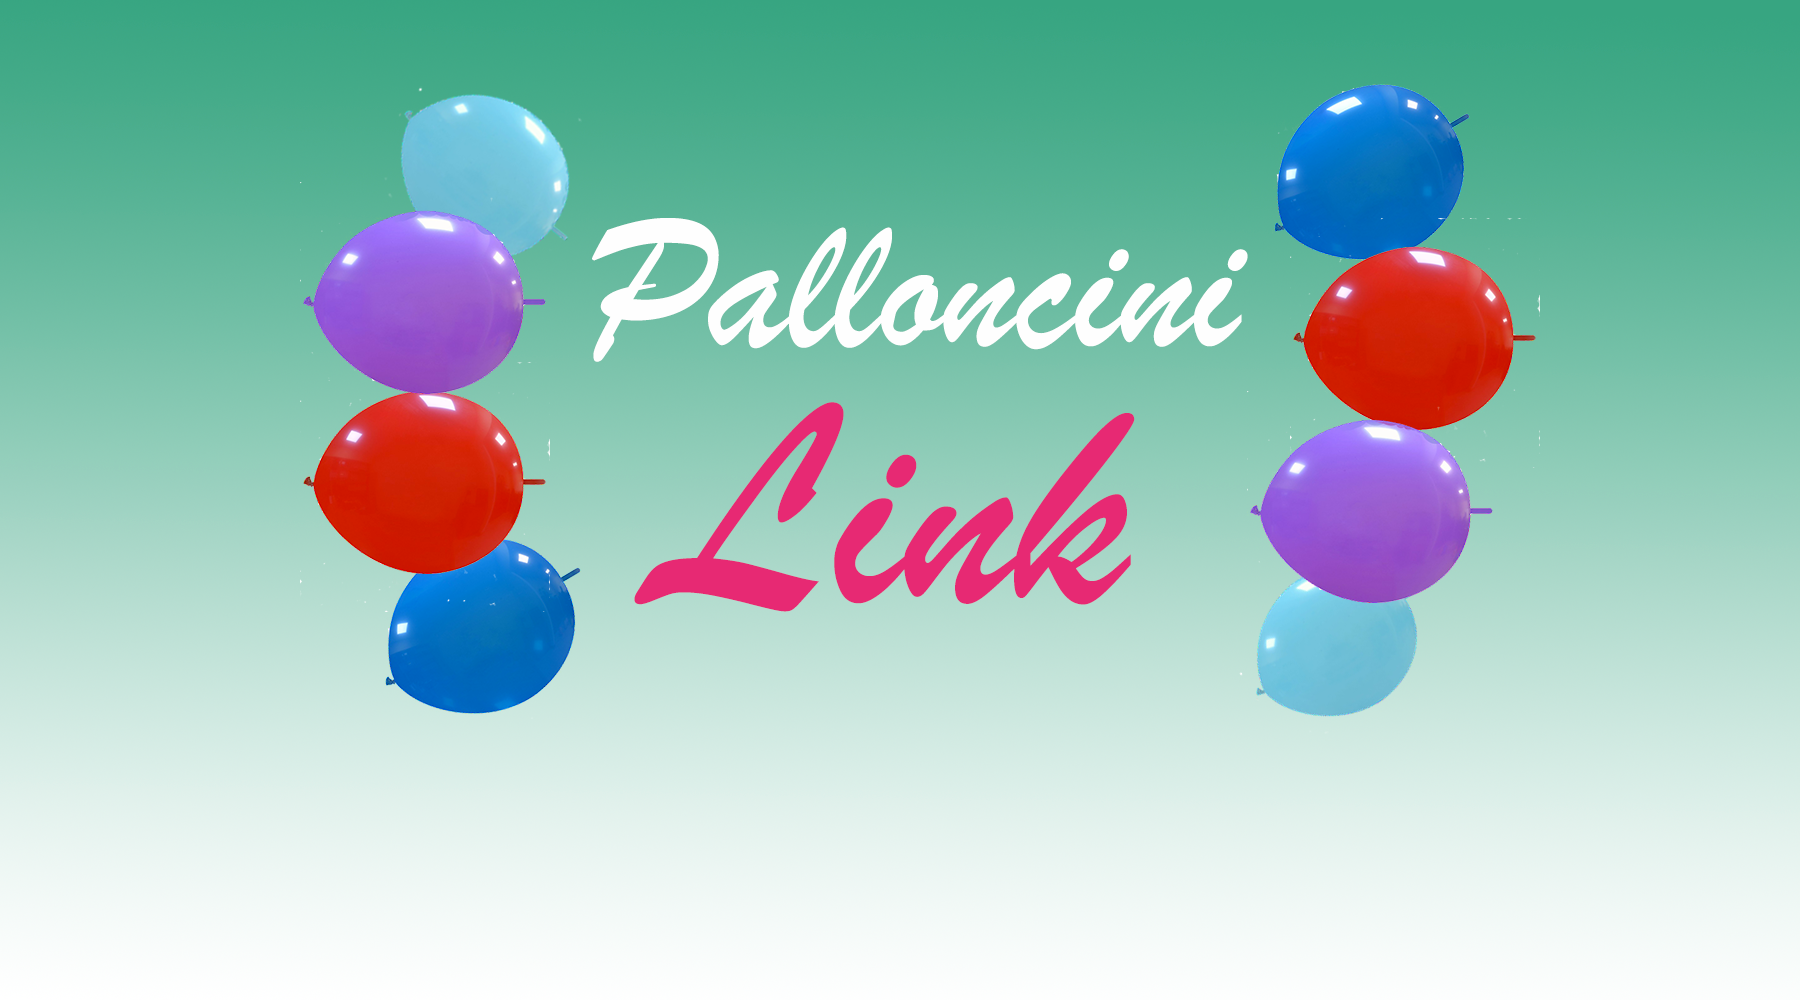 Palloncini & Magie added a new photo. - Palloncini & Magie